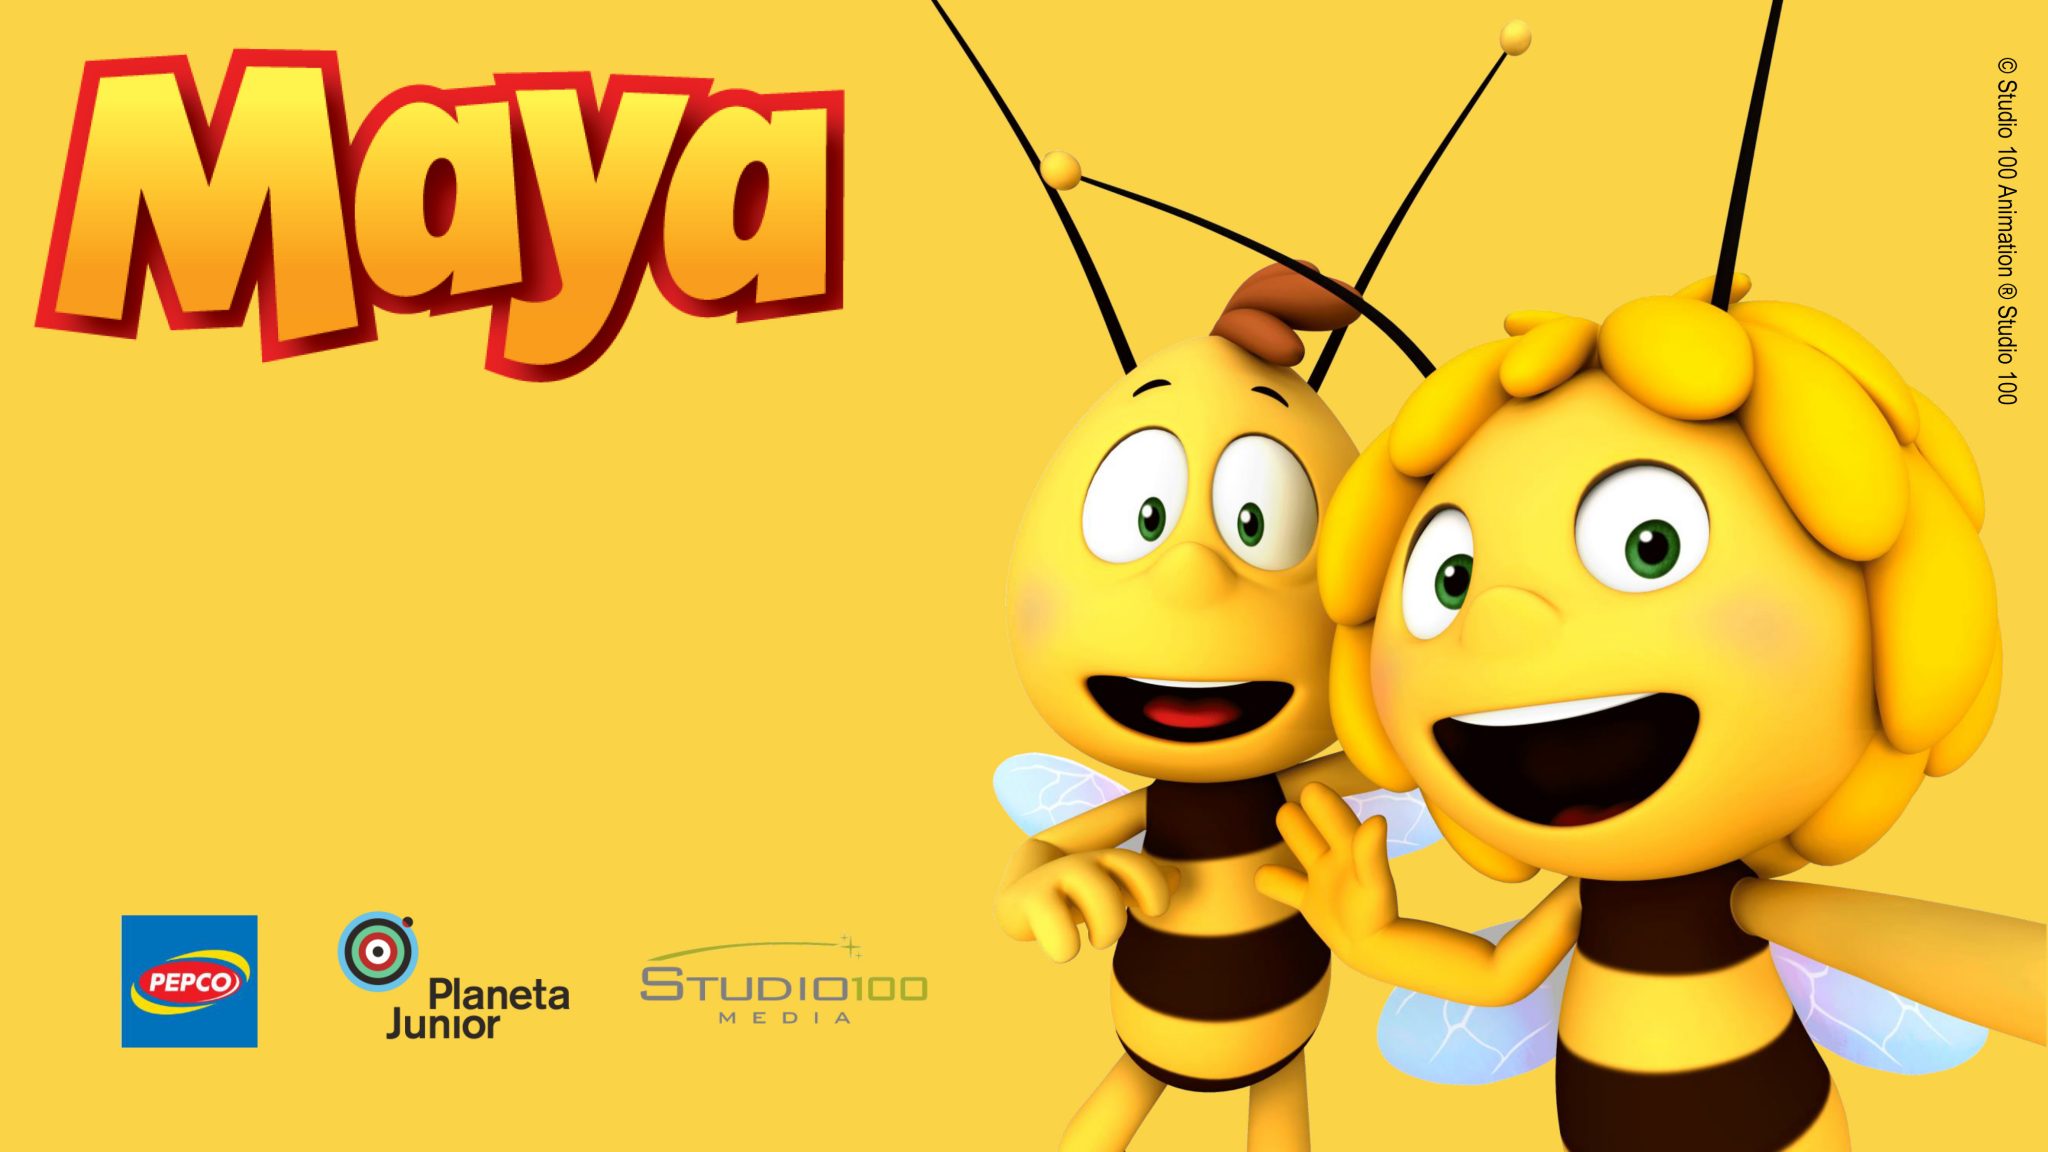 Pepco Launches Maya the Bee Collection with Planeta Junior and Studio 100 Media image